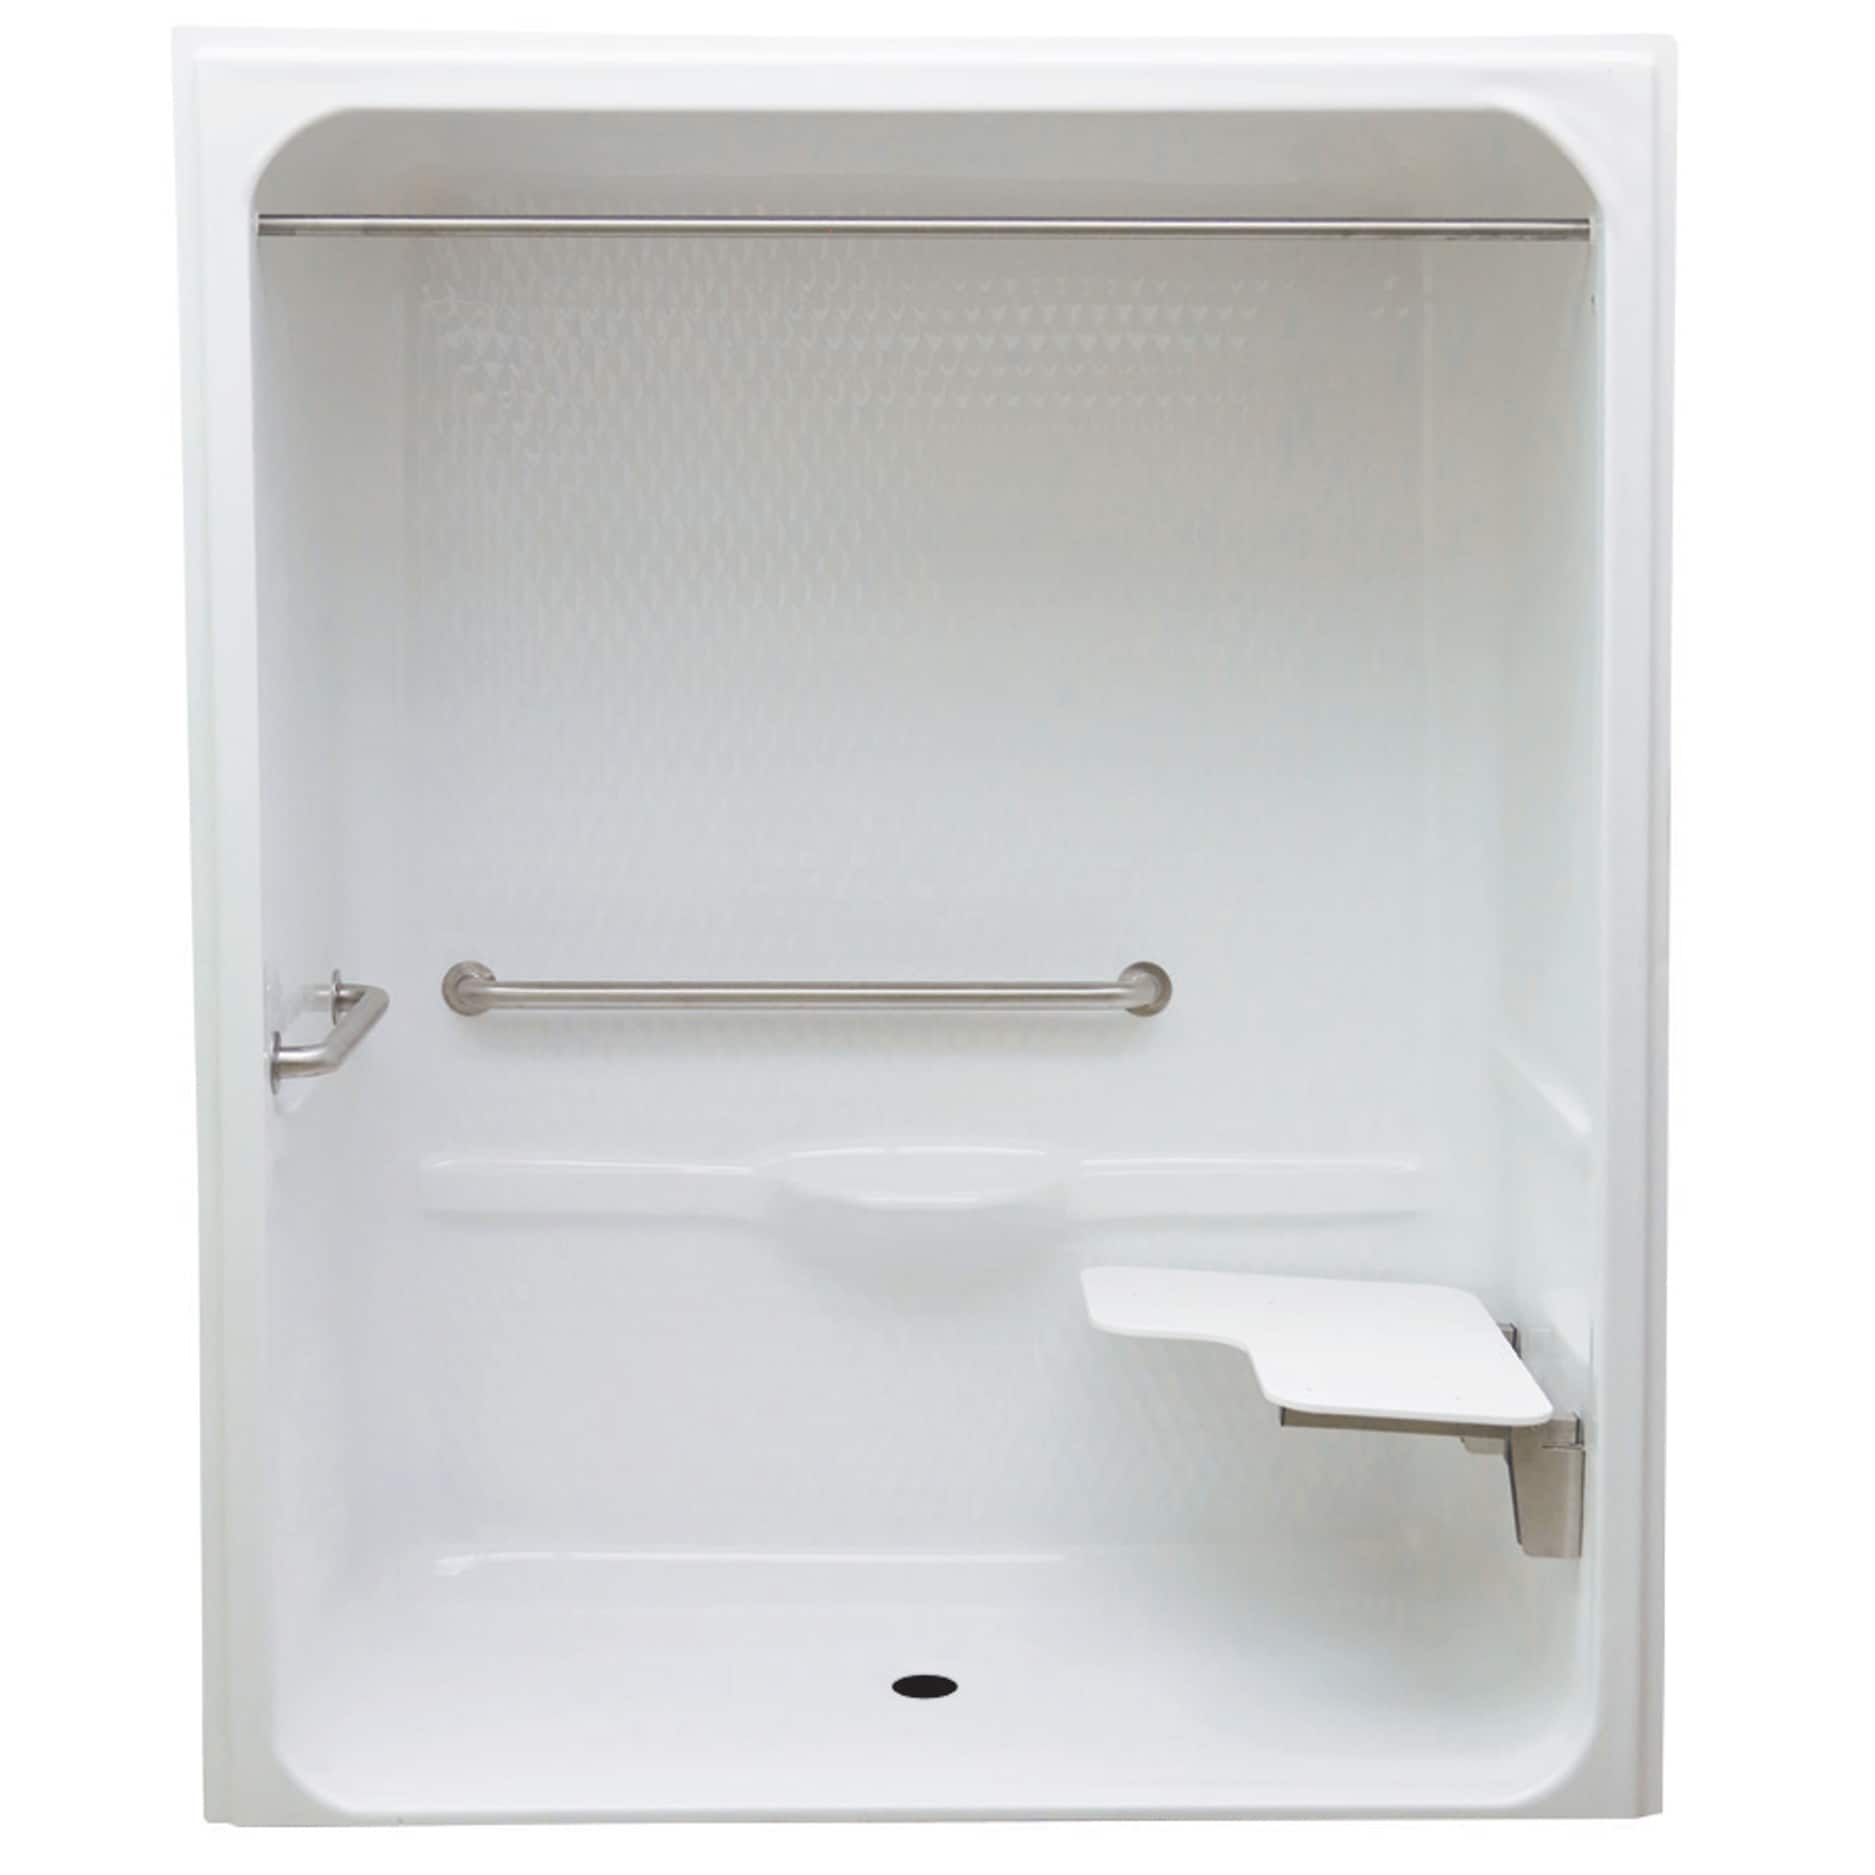 Laurel Mountain Toone ADA Roll-In Zero Threshold- Barrier Free White 30-in x 66-in x 82-in Base/Wall One-piece Shower Kit with Folding Seat Center -  LM6430BFR064